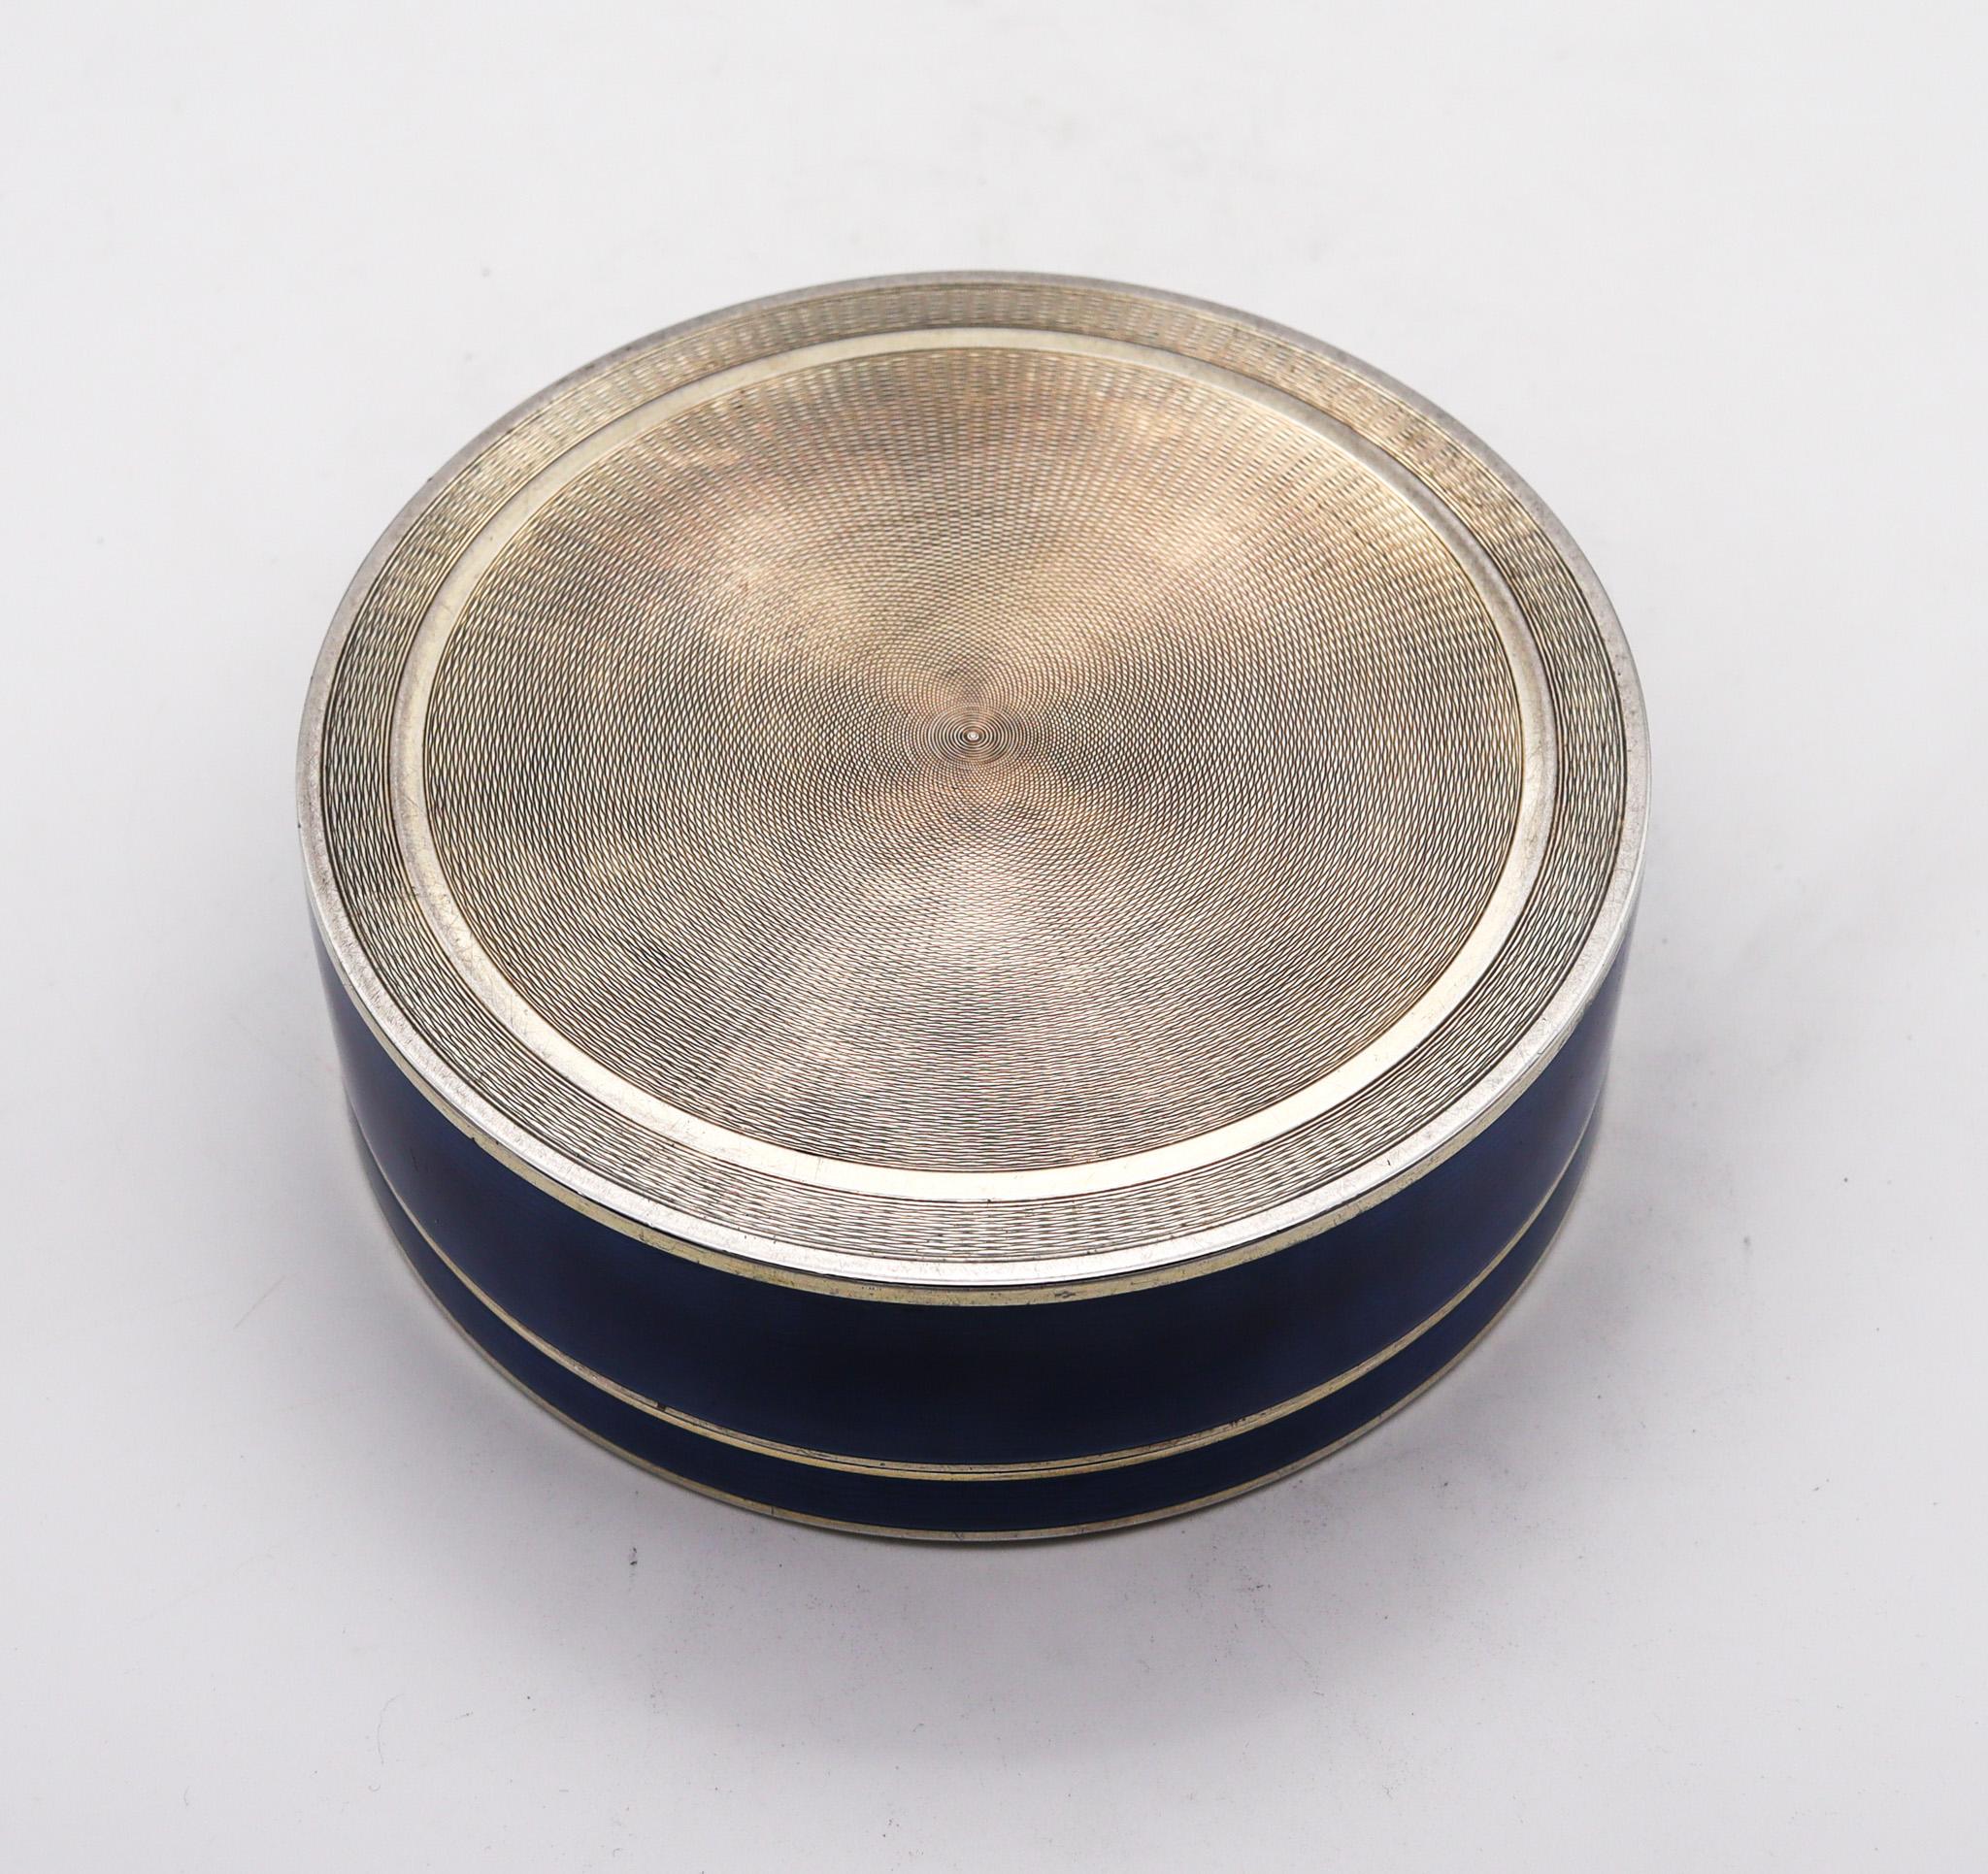 Monumental guilloche enameled round box.

An extraordinary early 20th century guilloche enamel box, created in Pforzheim Germany, with Edwardian neo classical patterns, circa 1910. This beautiful, oversized box was carefully crafted with impeccable